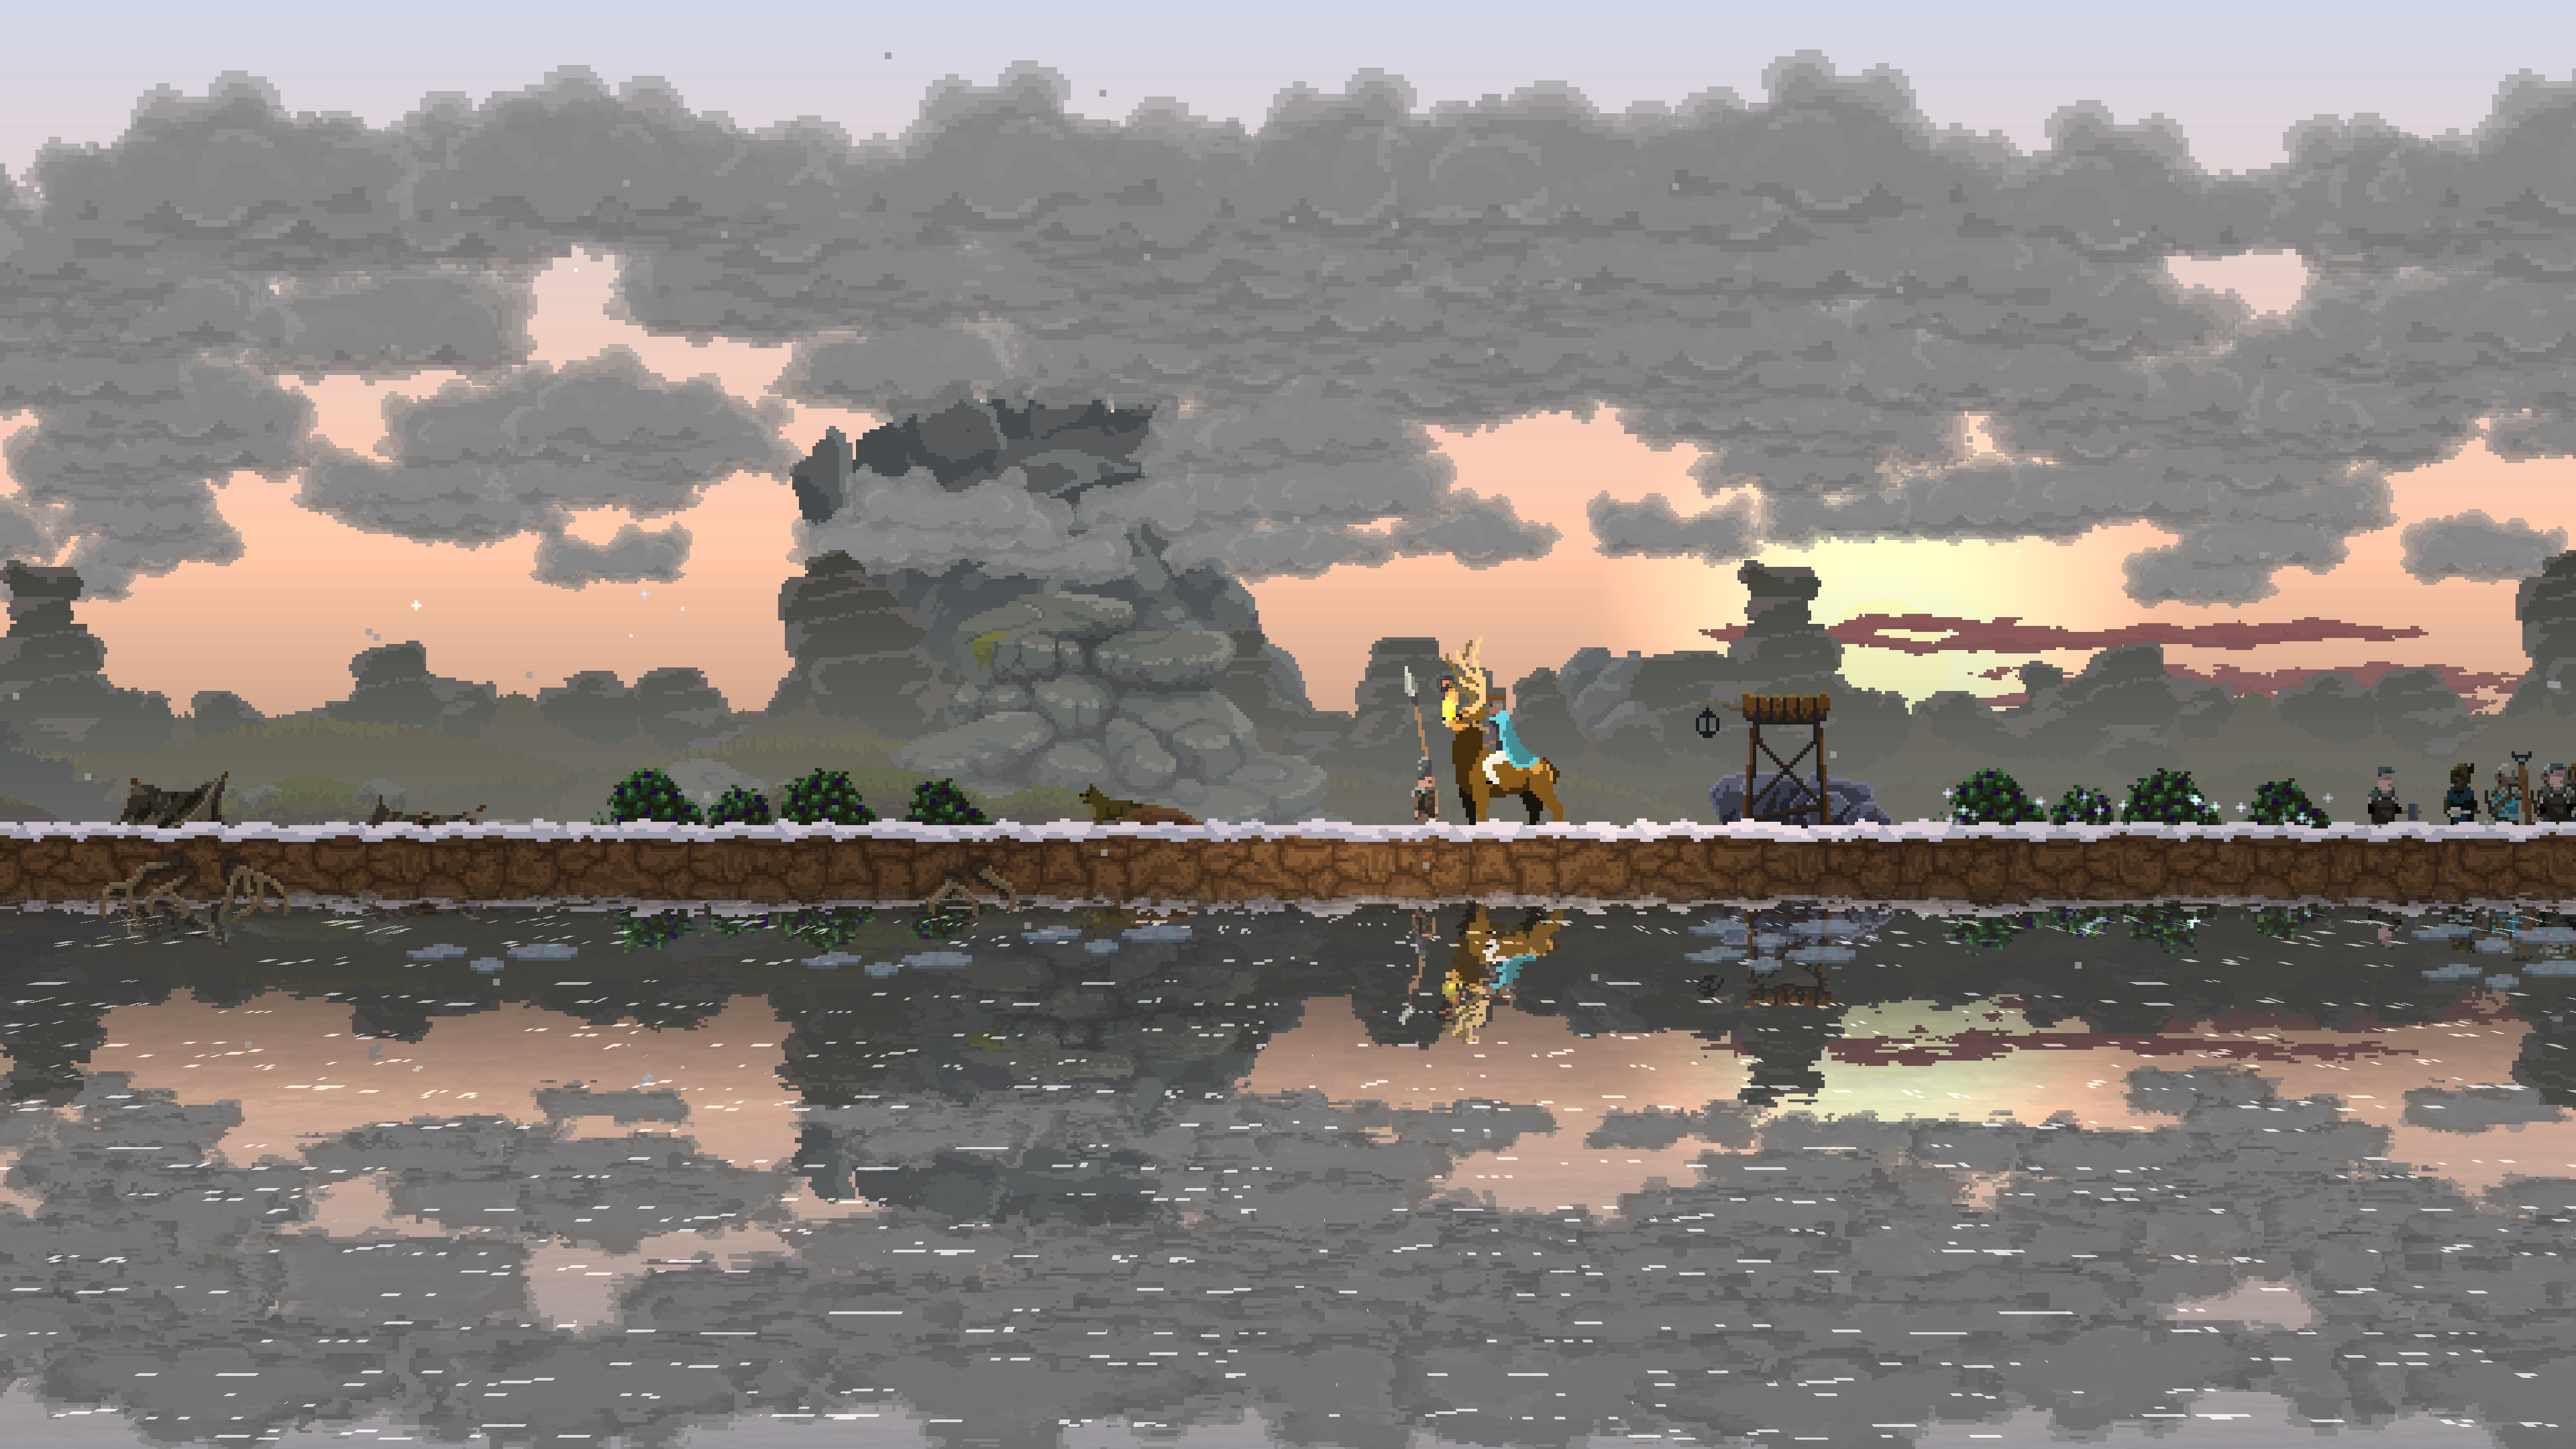 A screenshot showing a king riding on the back of a stag, with a sunrise in the background behind rocky mountains and snow on the ground and falling from the sky.